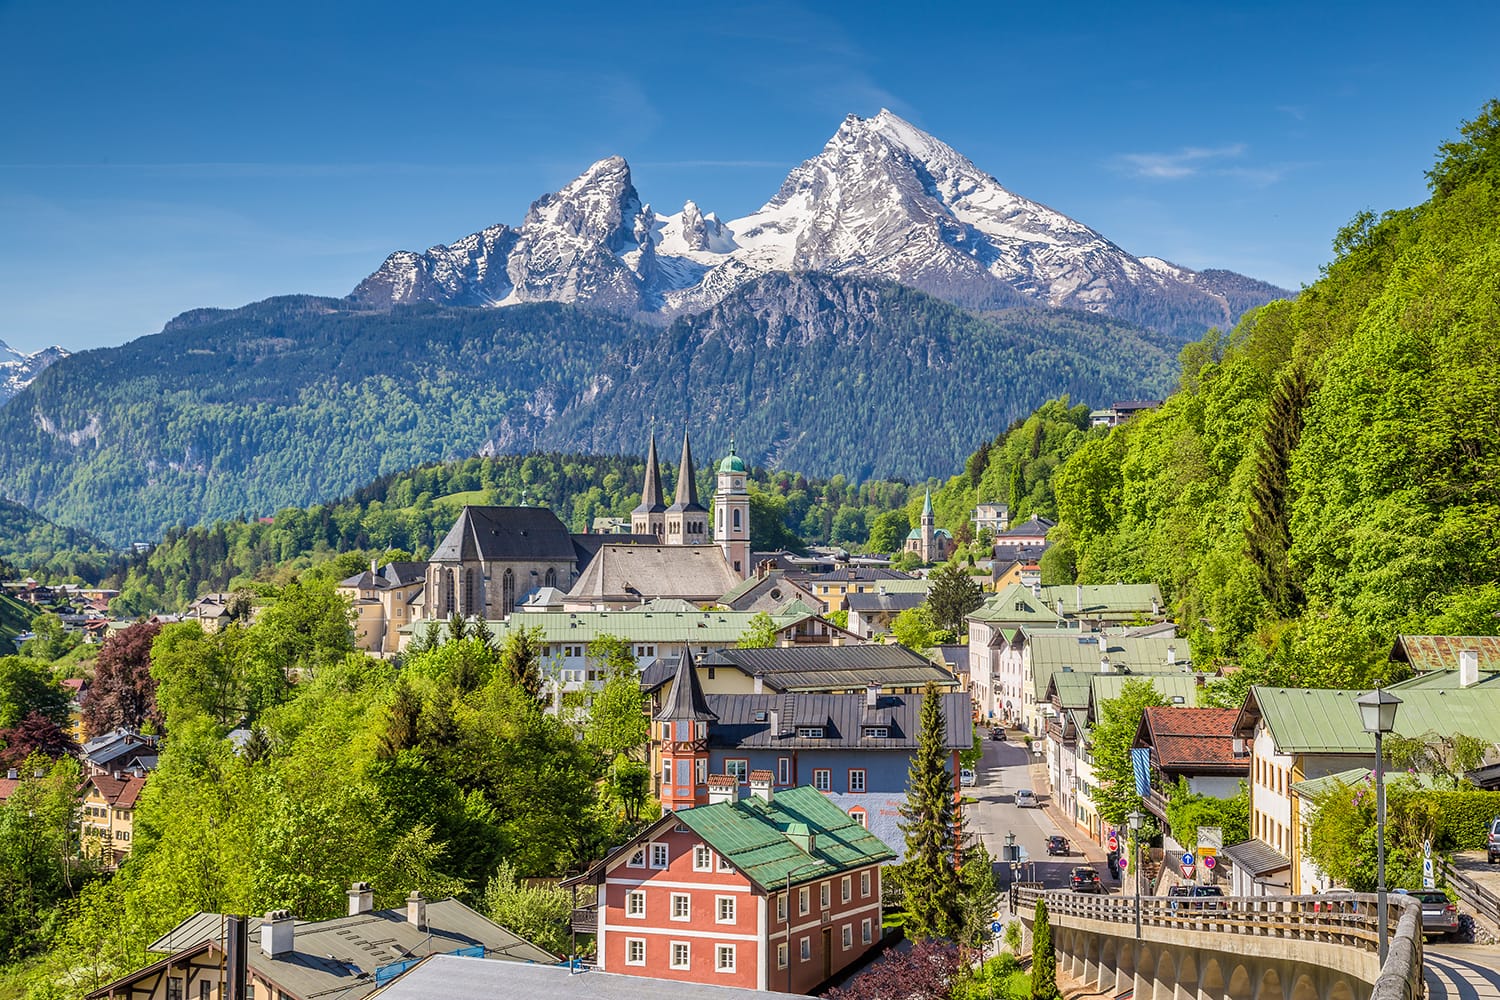 Historic town of Berchtesgaden with famous Watzmann mountain in the background on a sunny day with blue sky and clouds in springtime, Nationalpark Berchtesgadener Land, Upper Bavaria, Germany